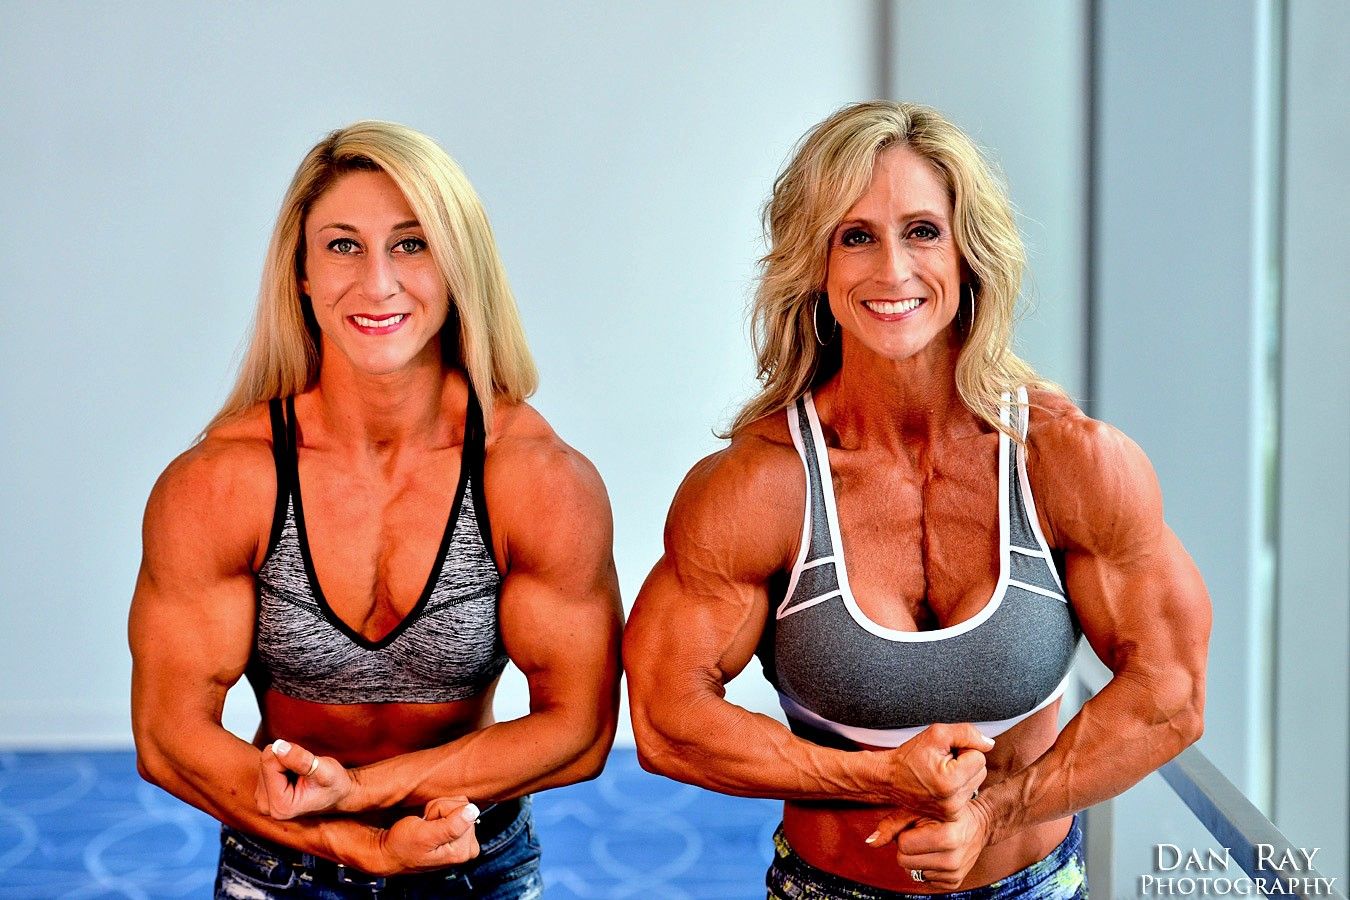 bill rollo recommends Female Most Muscular Pose